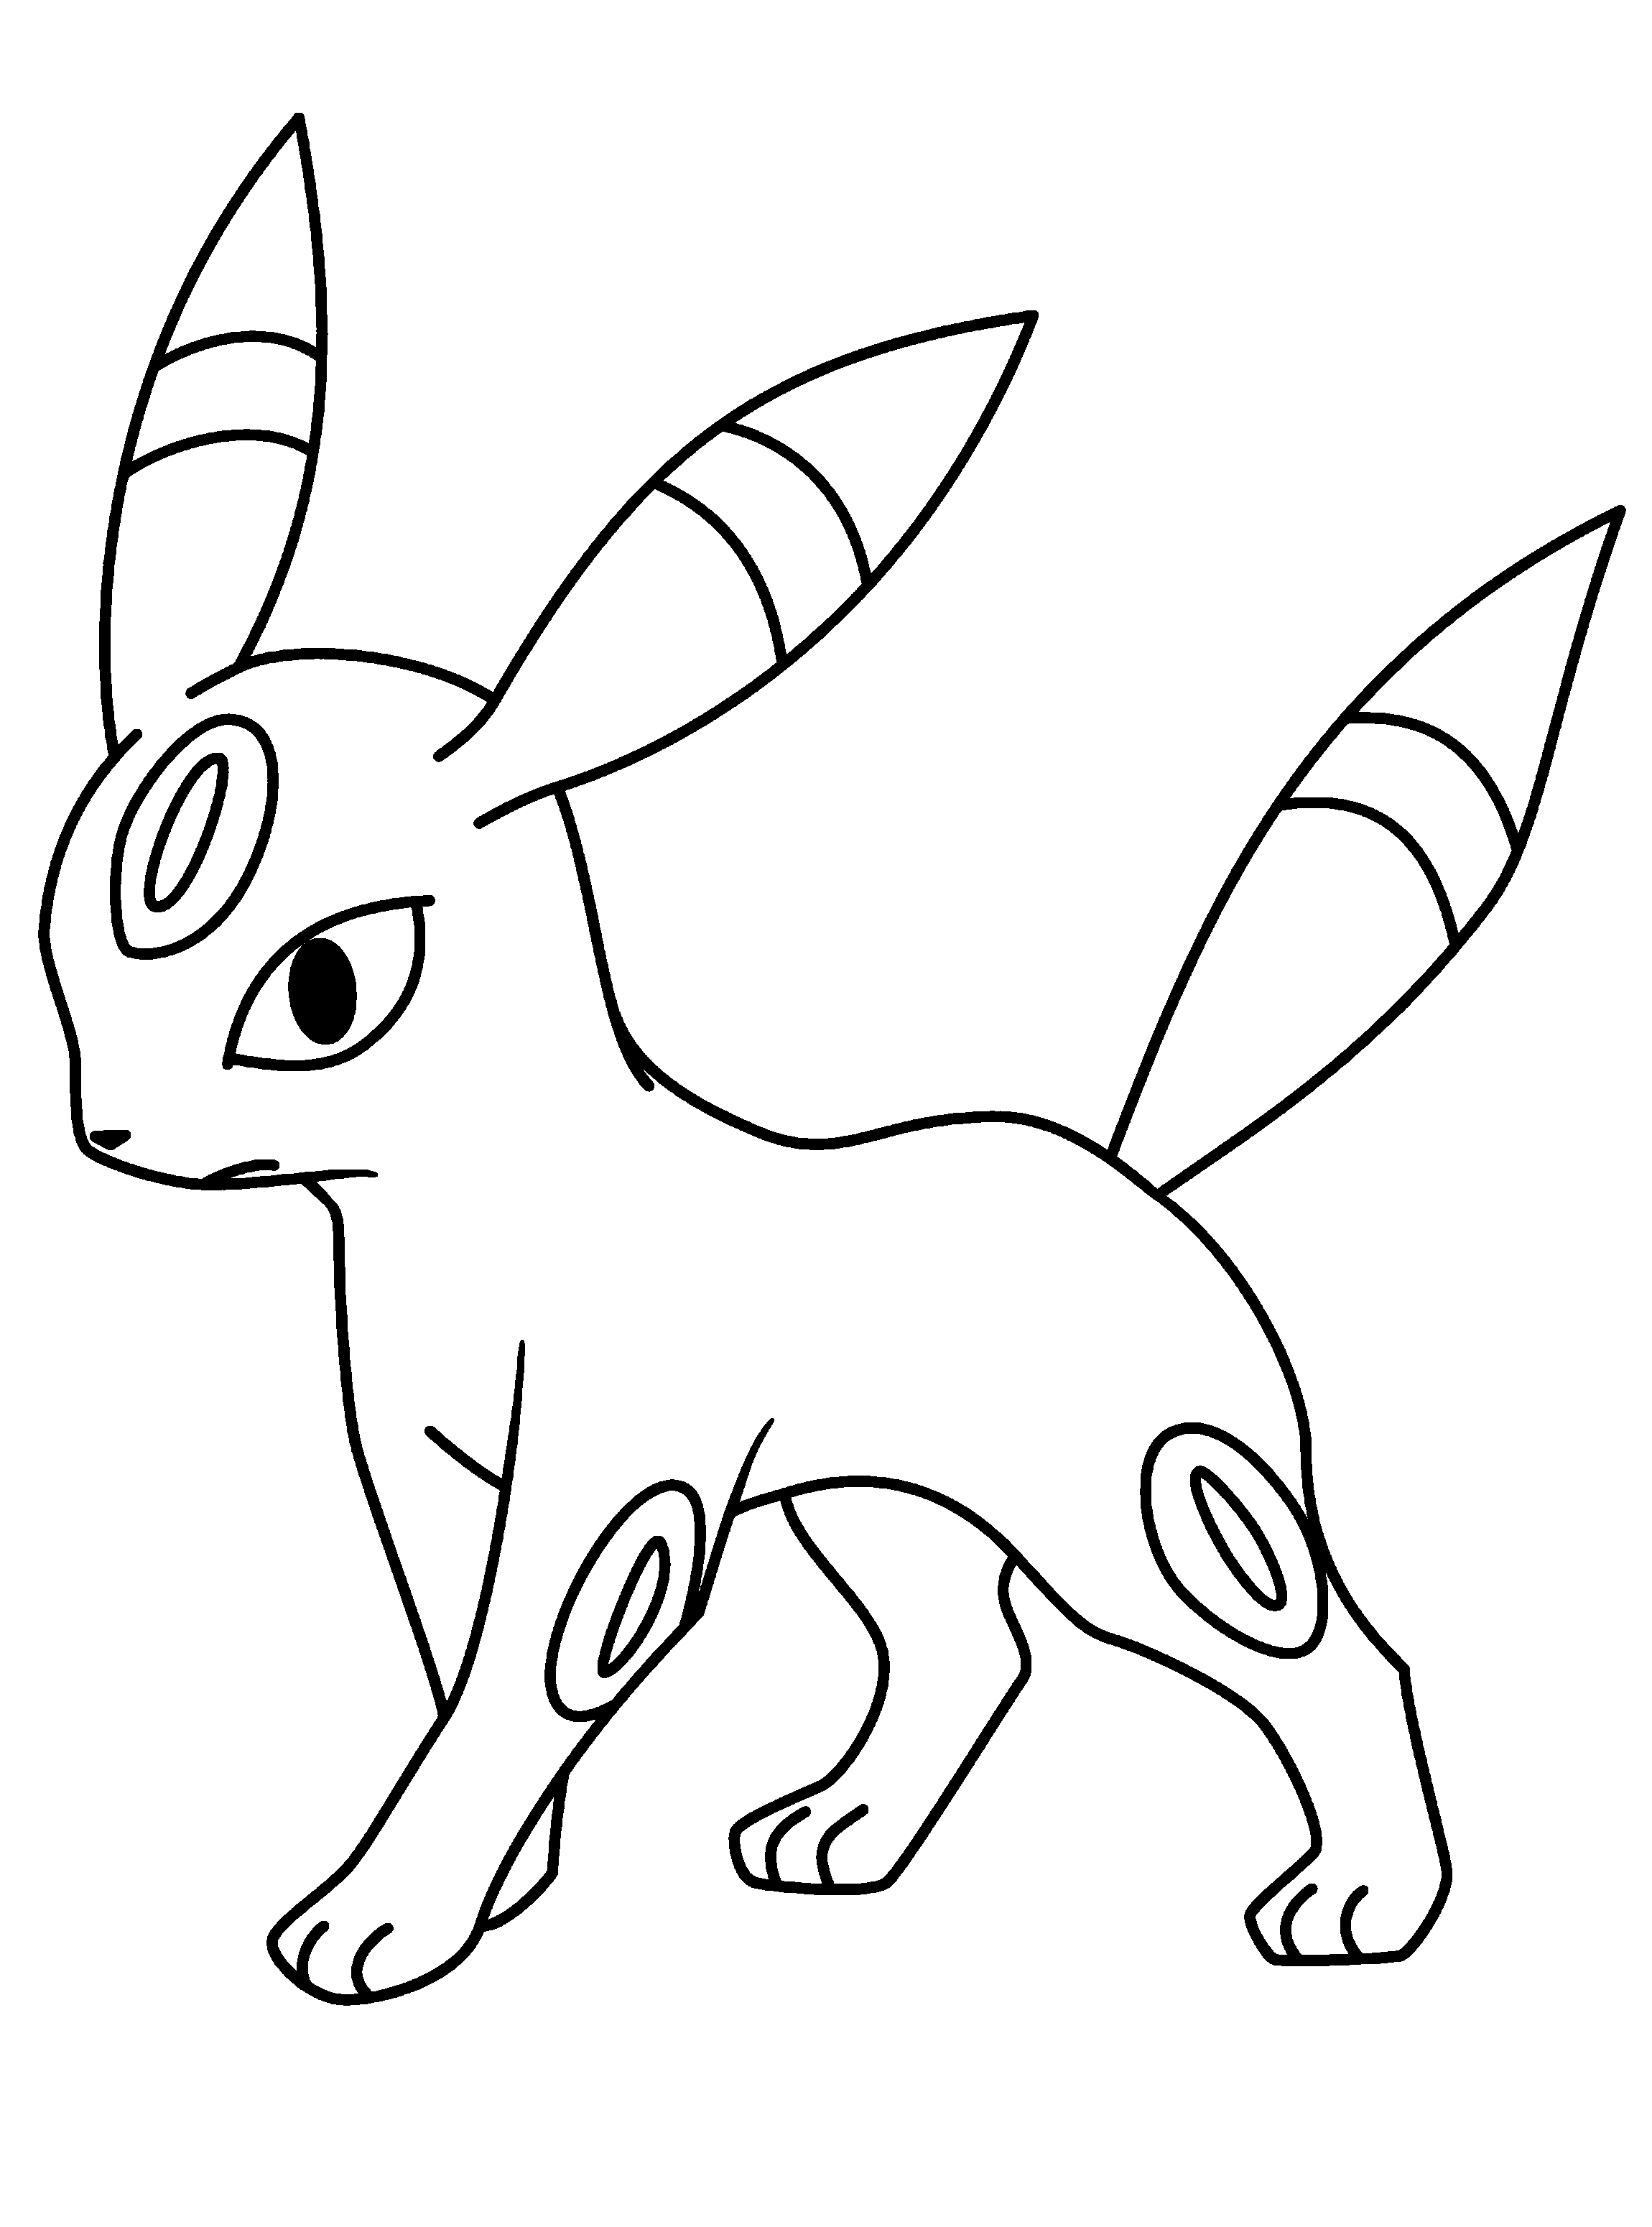 pokemon colouring pages online free pokemon coloring pages join your favorite pokemon on an pokemon online free colouring pages 